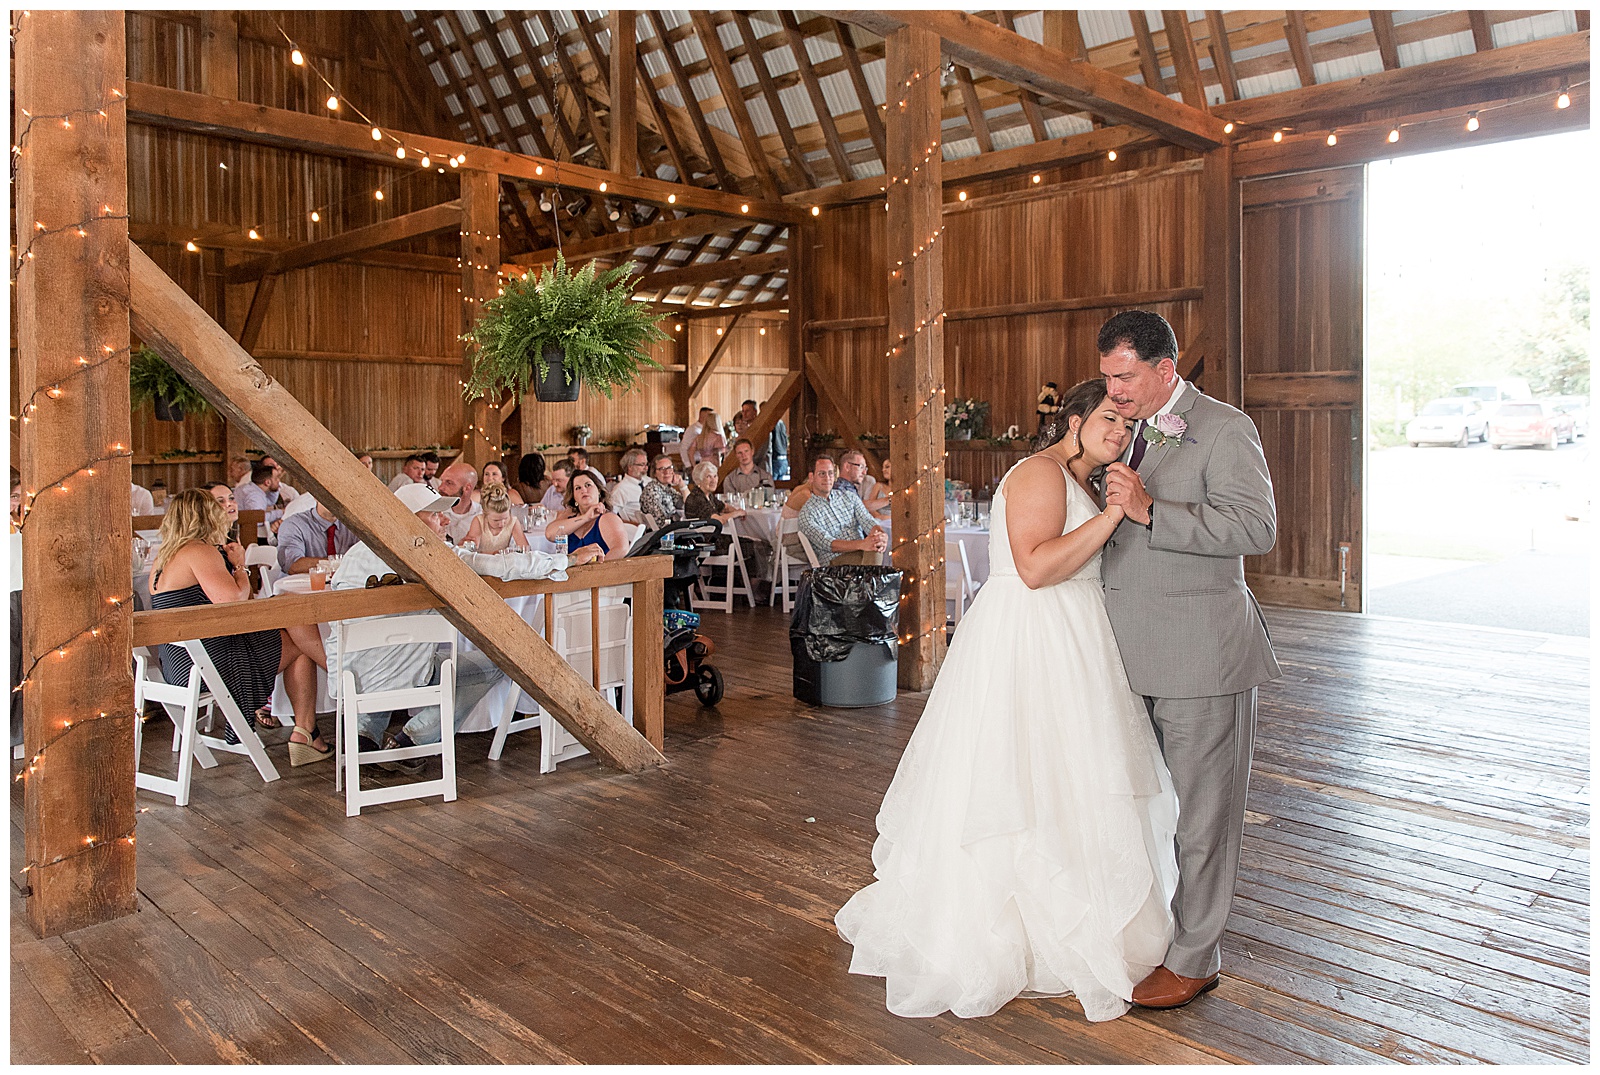 bride resting her head on her father's shoulder as they do the father-daughter dance inside barn venue in lancaster, pennsylvania